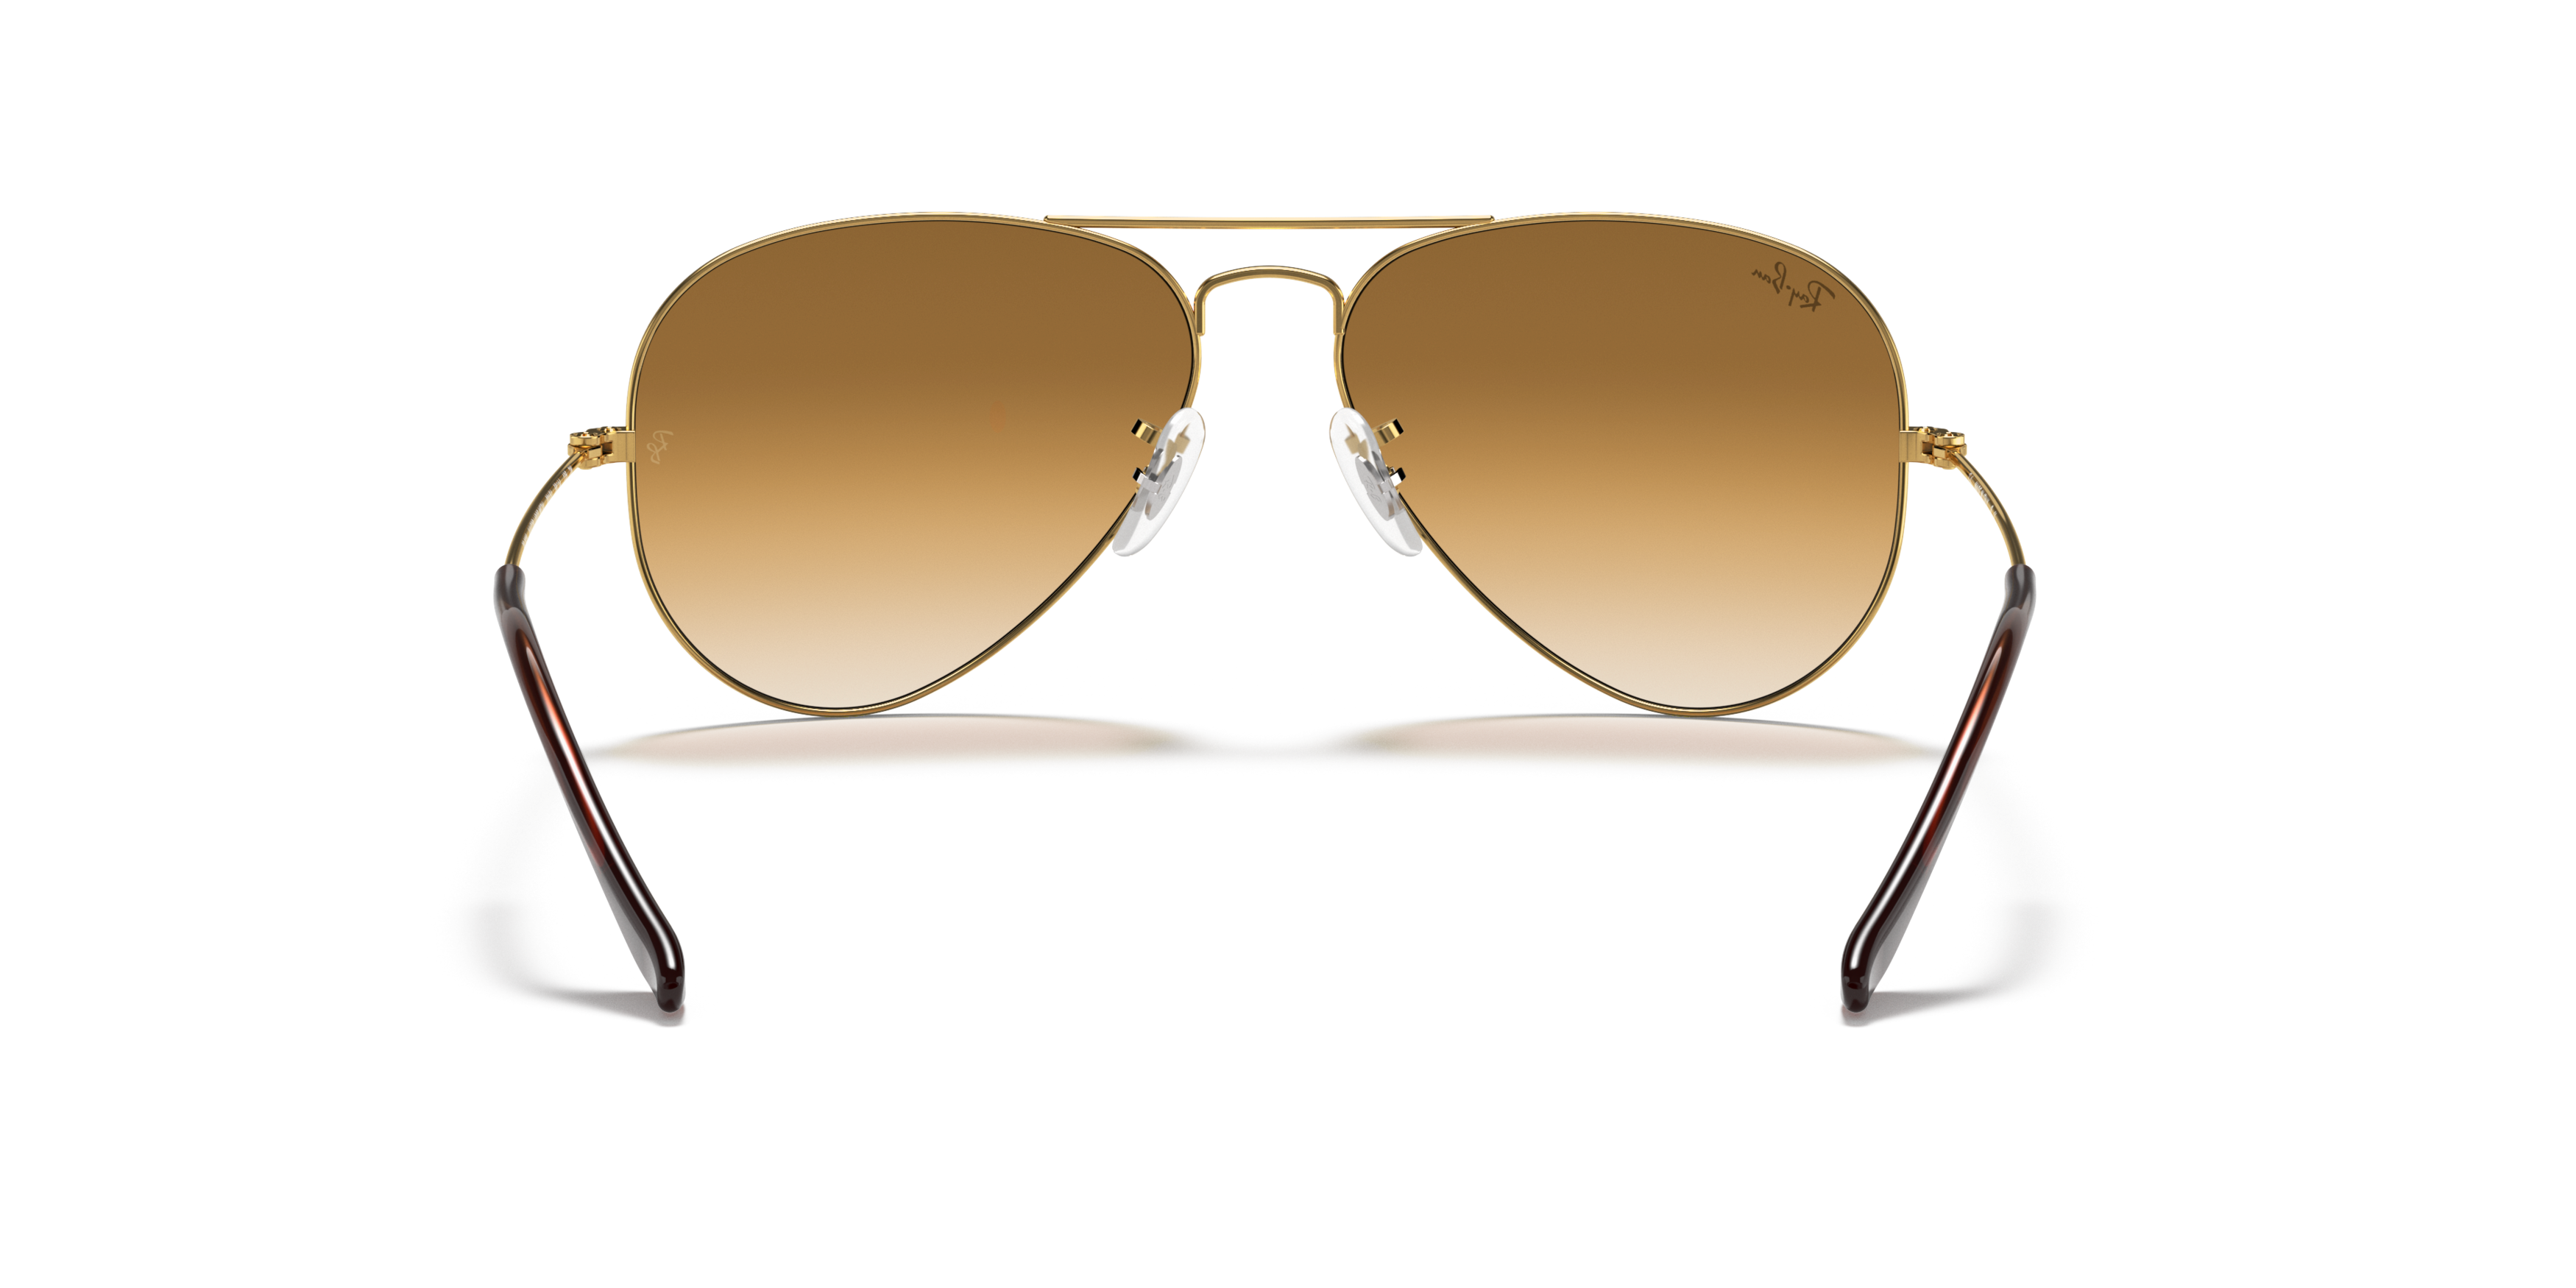 [products.image.detail02] Ray-Ban AVIATOR 001/51